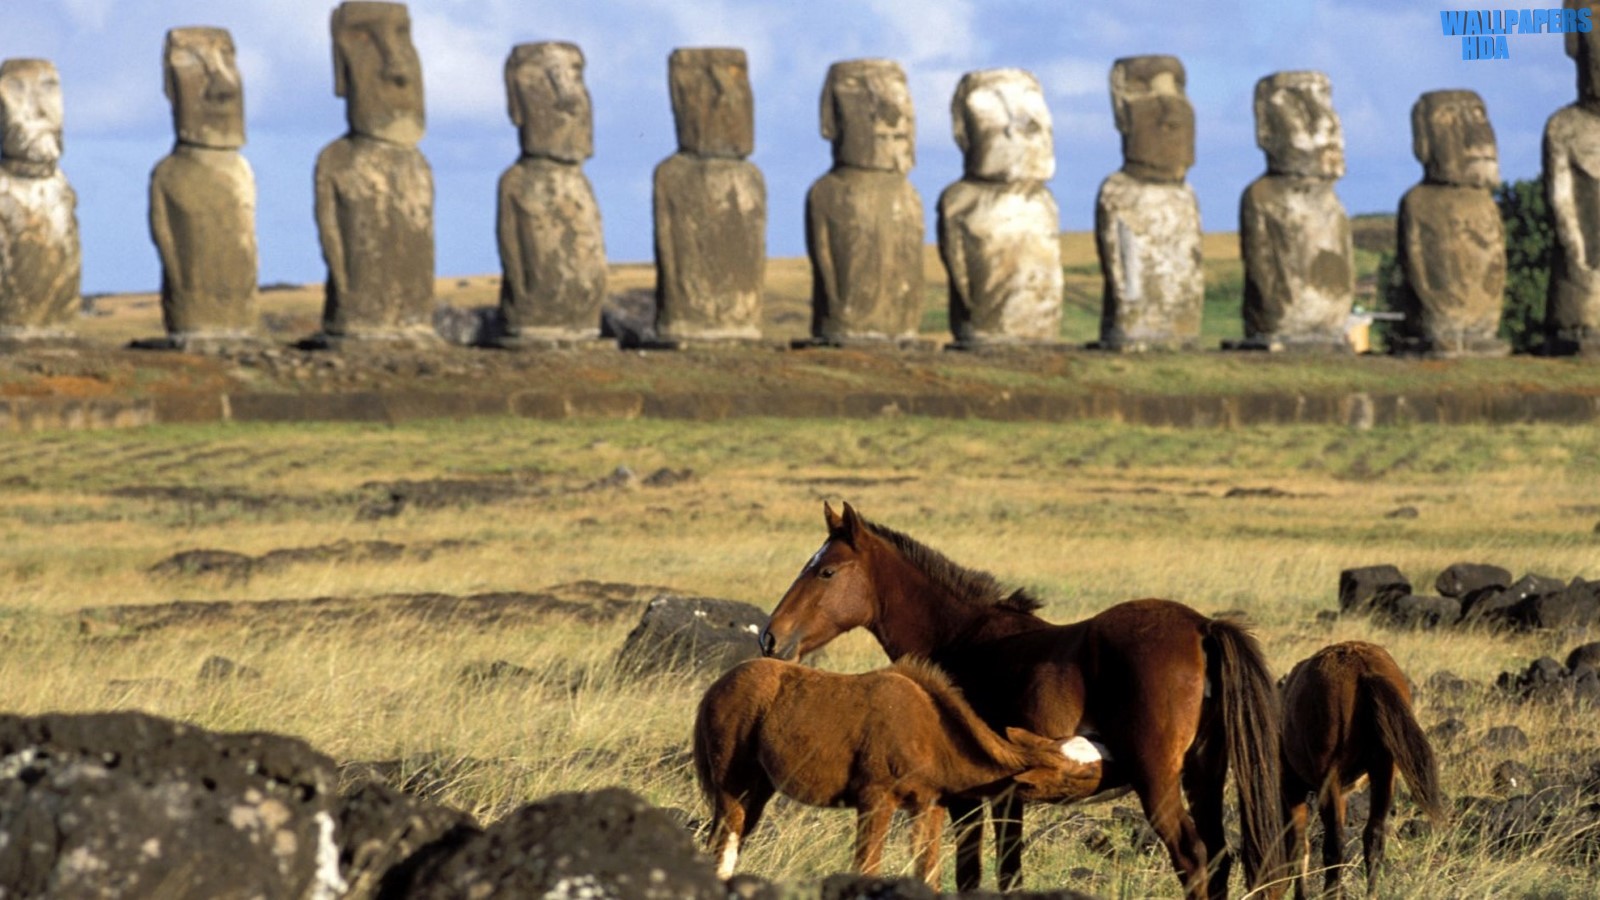 Horses of easter island chile wallpaper 1600x900